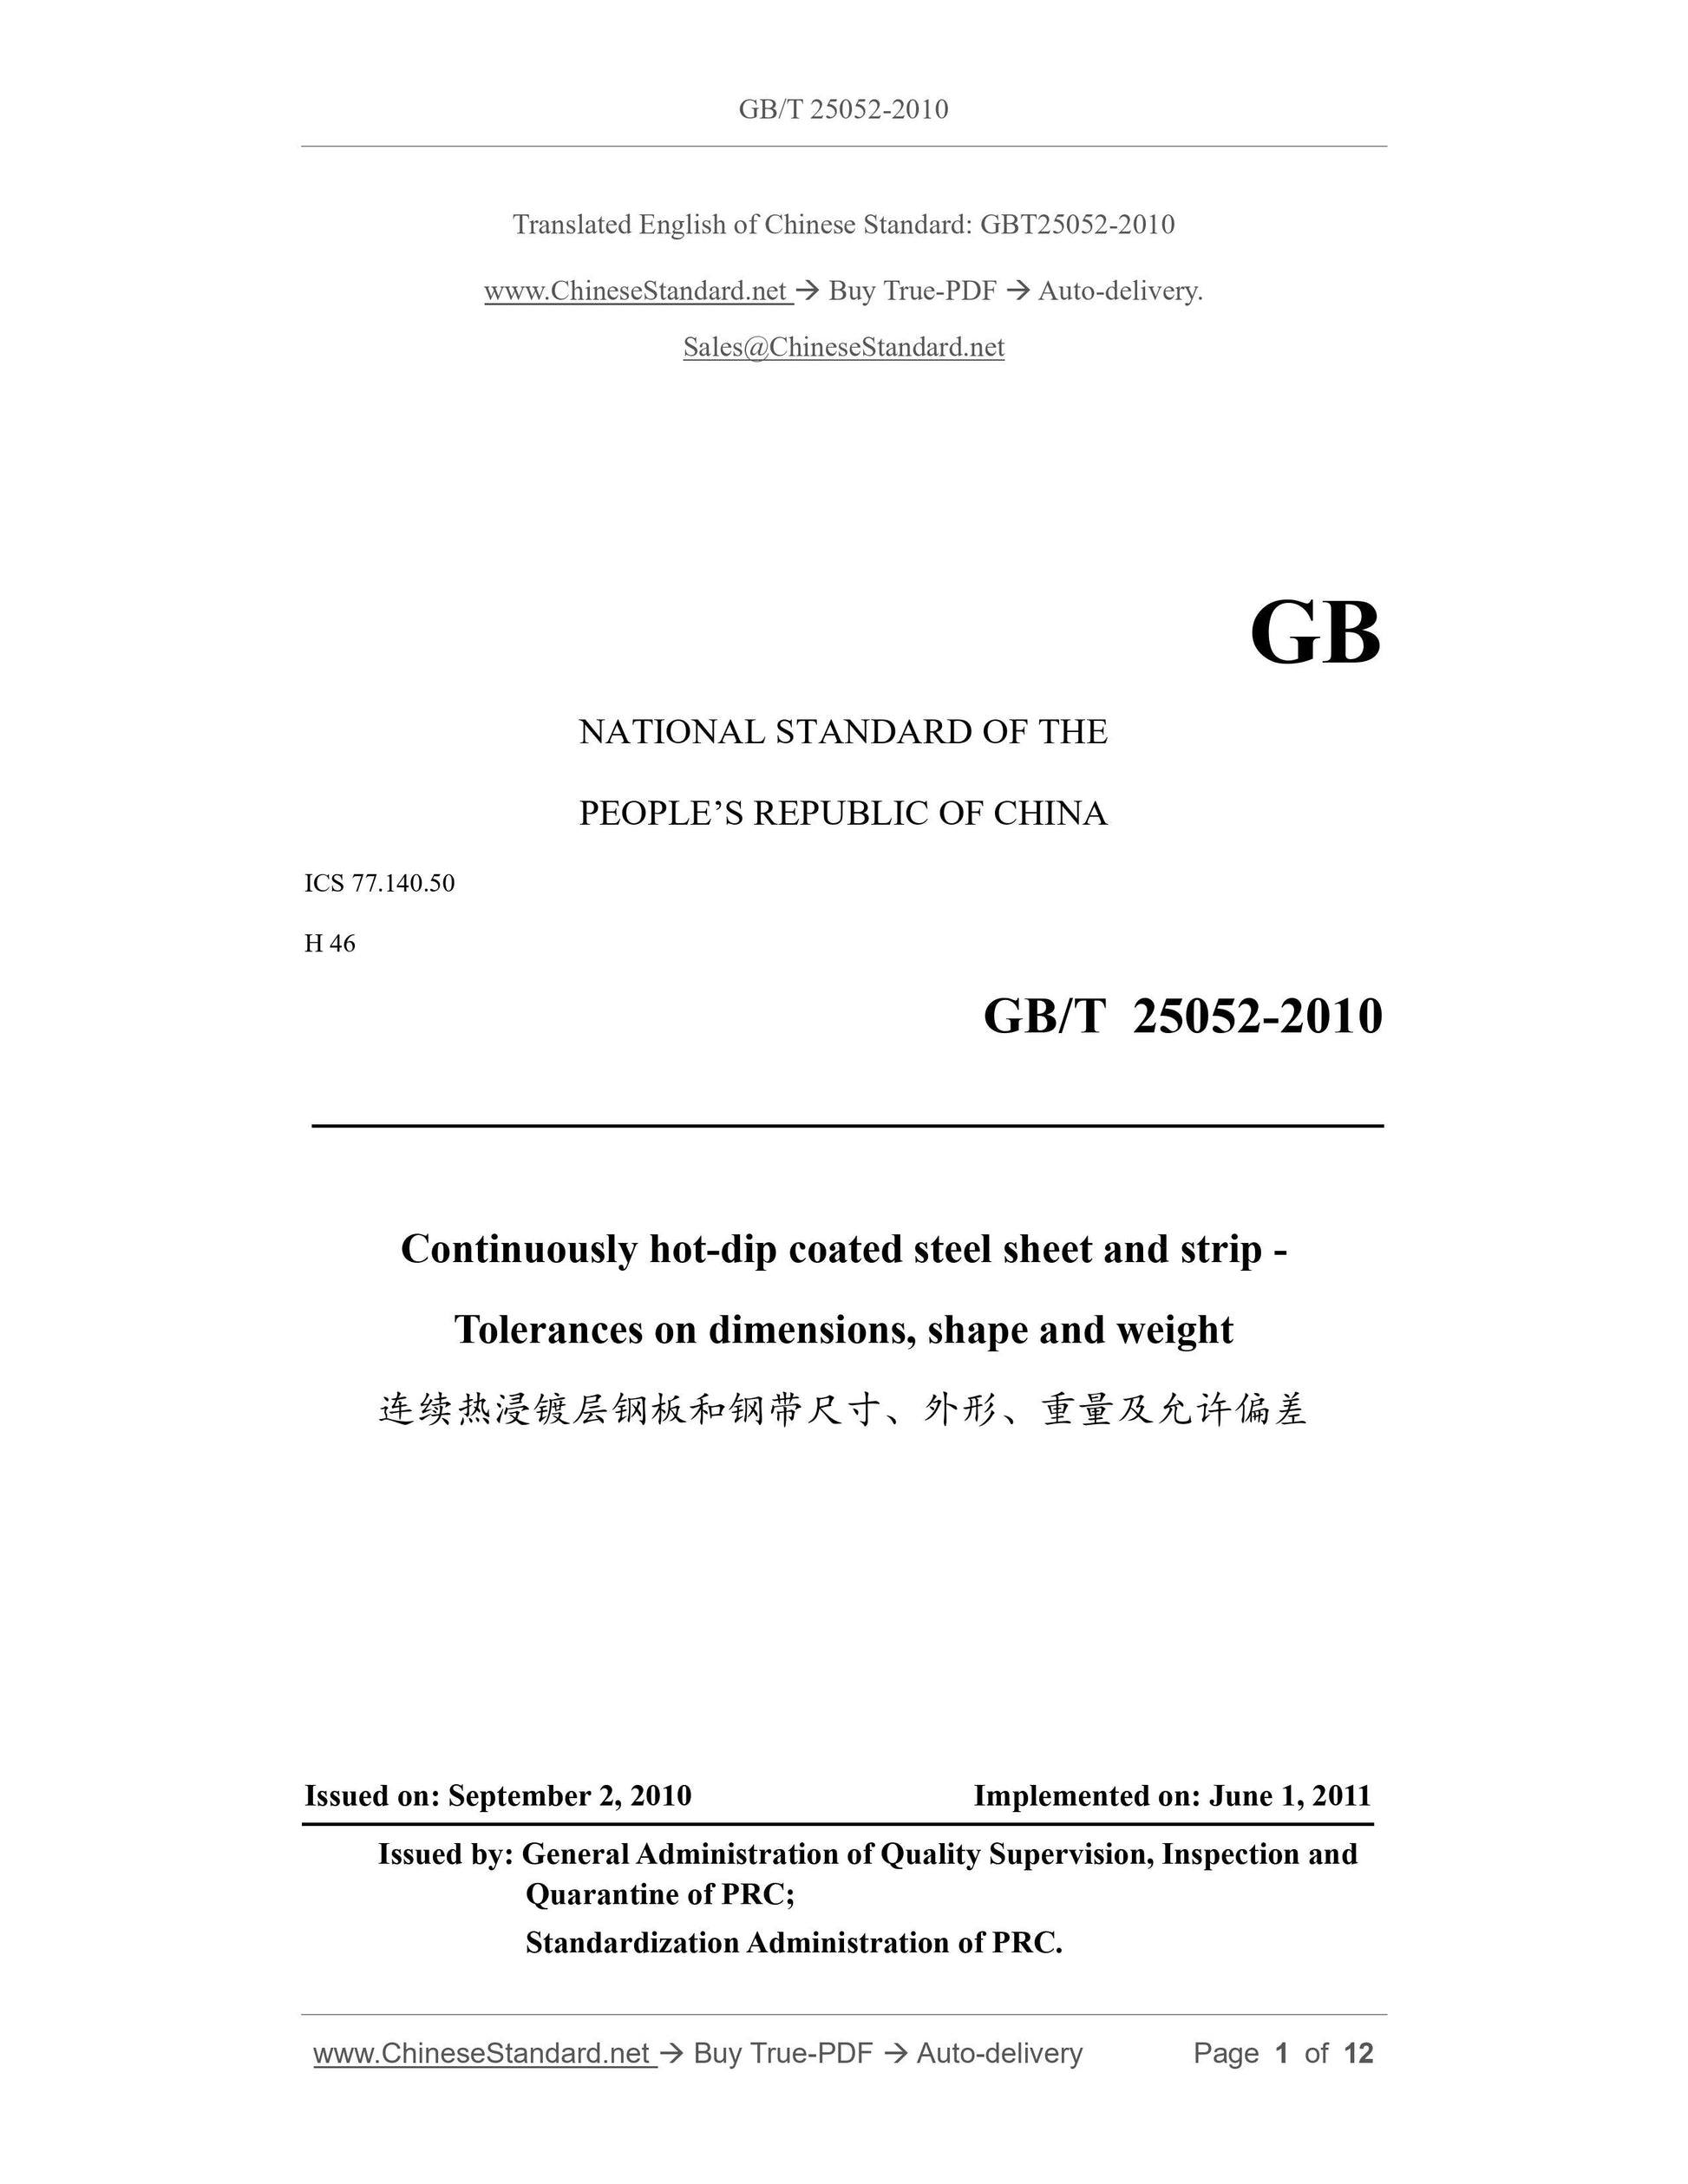 GB/T 25052-2010 Page 1